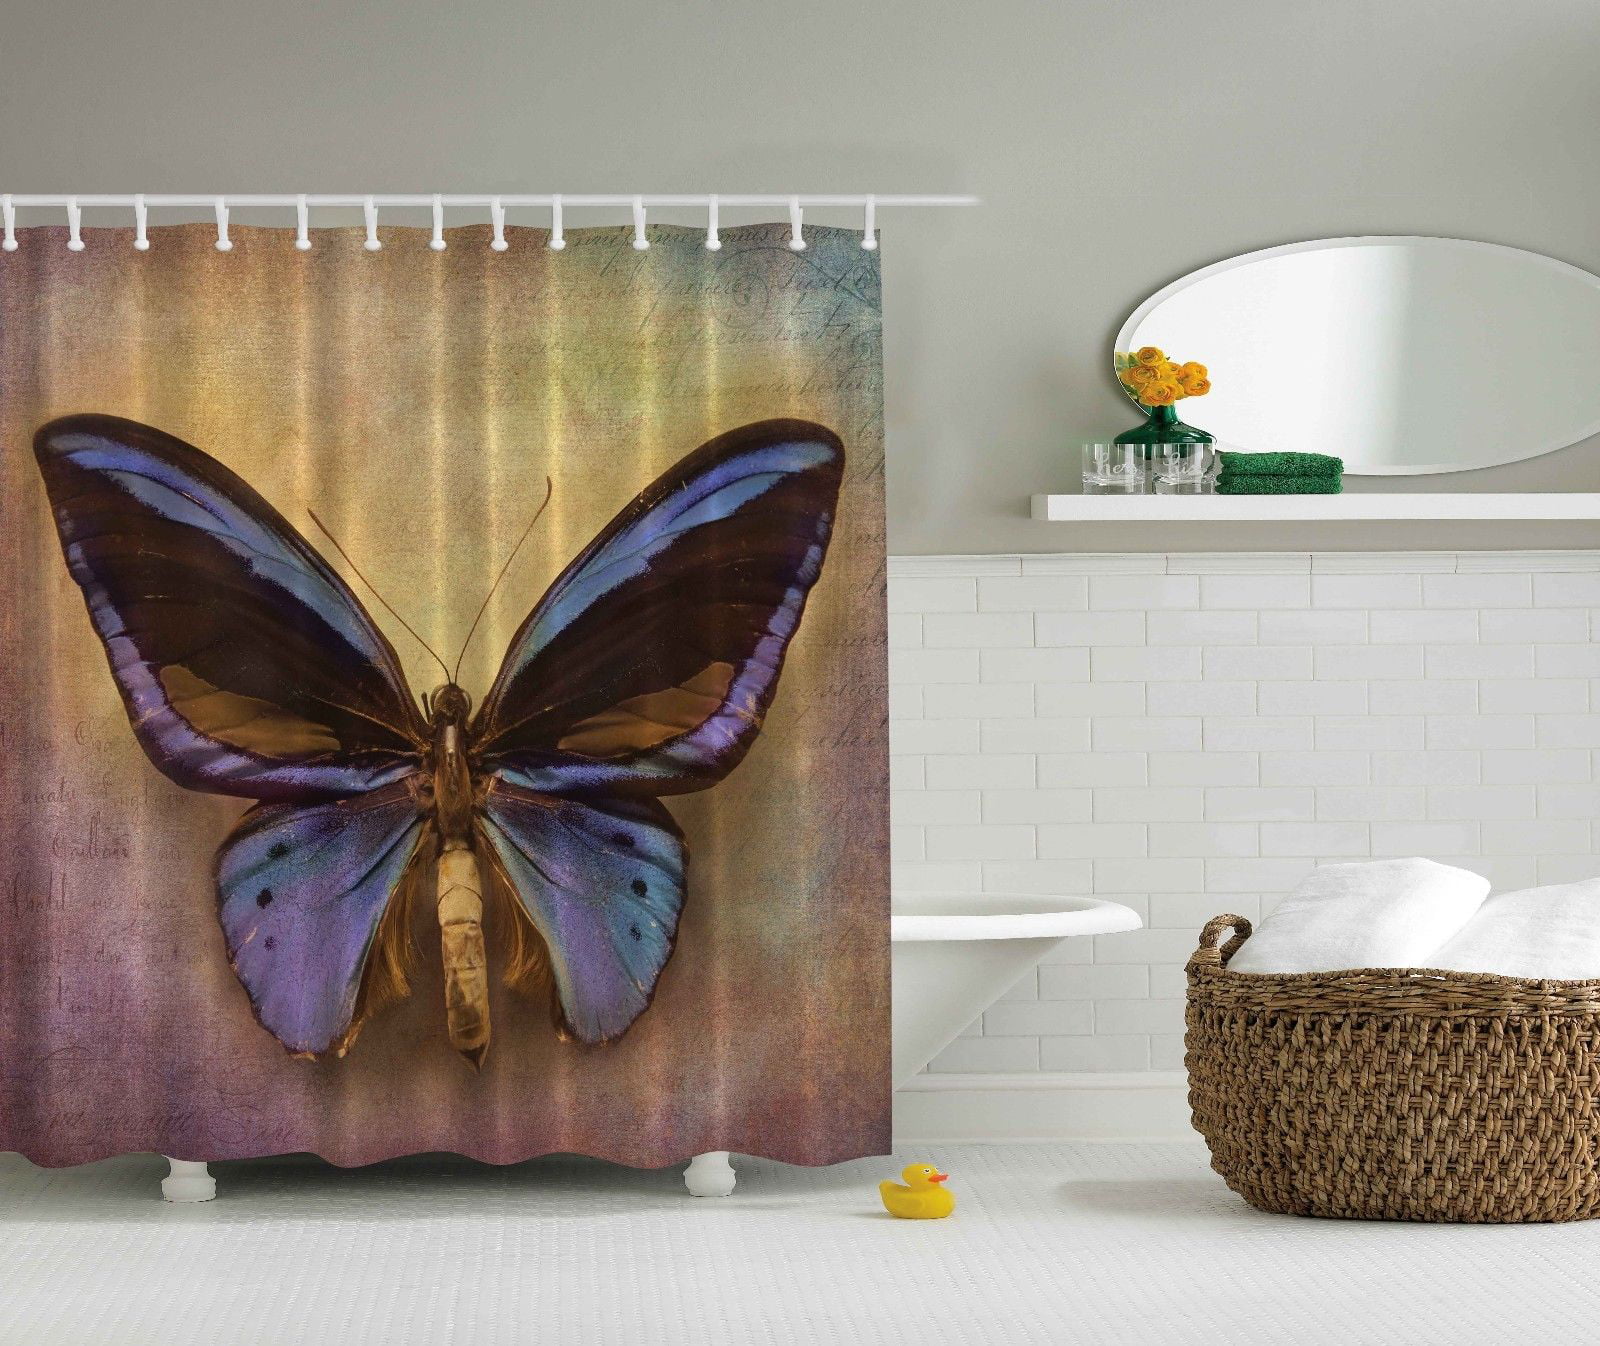 69 W x 70 L Cloth Fabric Bathroom Decor Set with Hooks Ambesonne Butterfly Shower Curtain Monarch Butterfly Vintage British Grunge Victorian Photography Art Theme Print Purple Brown